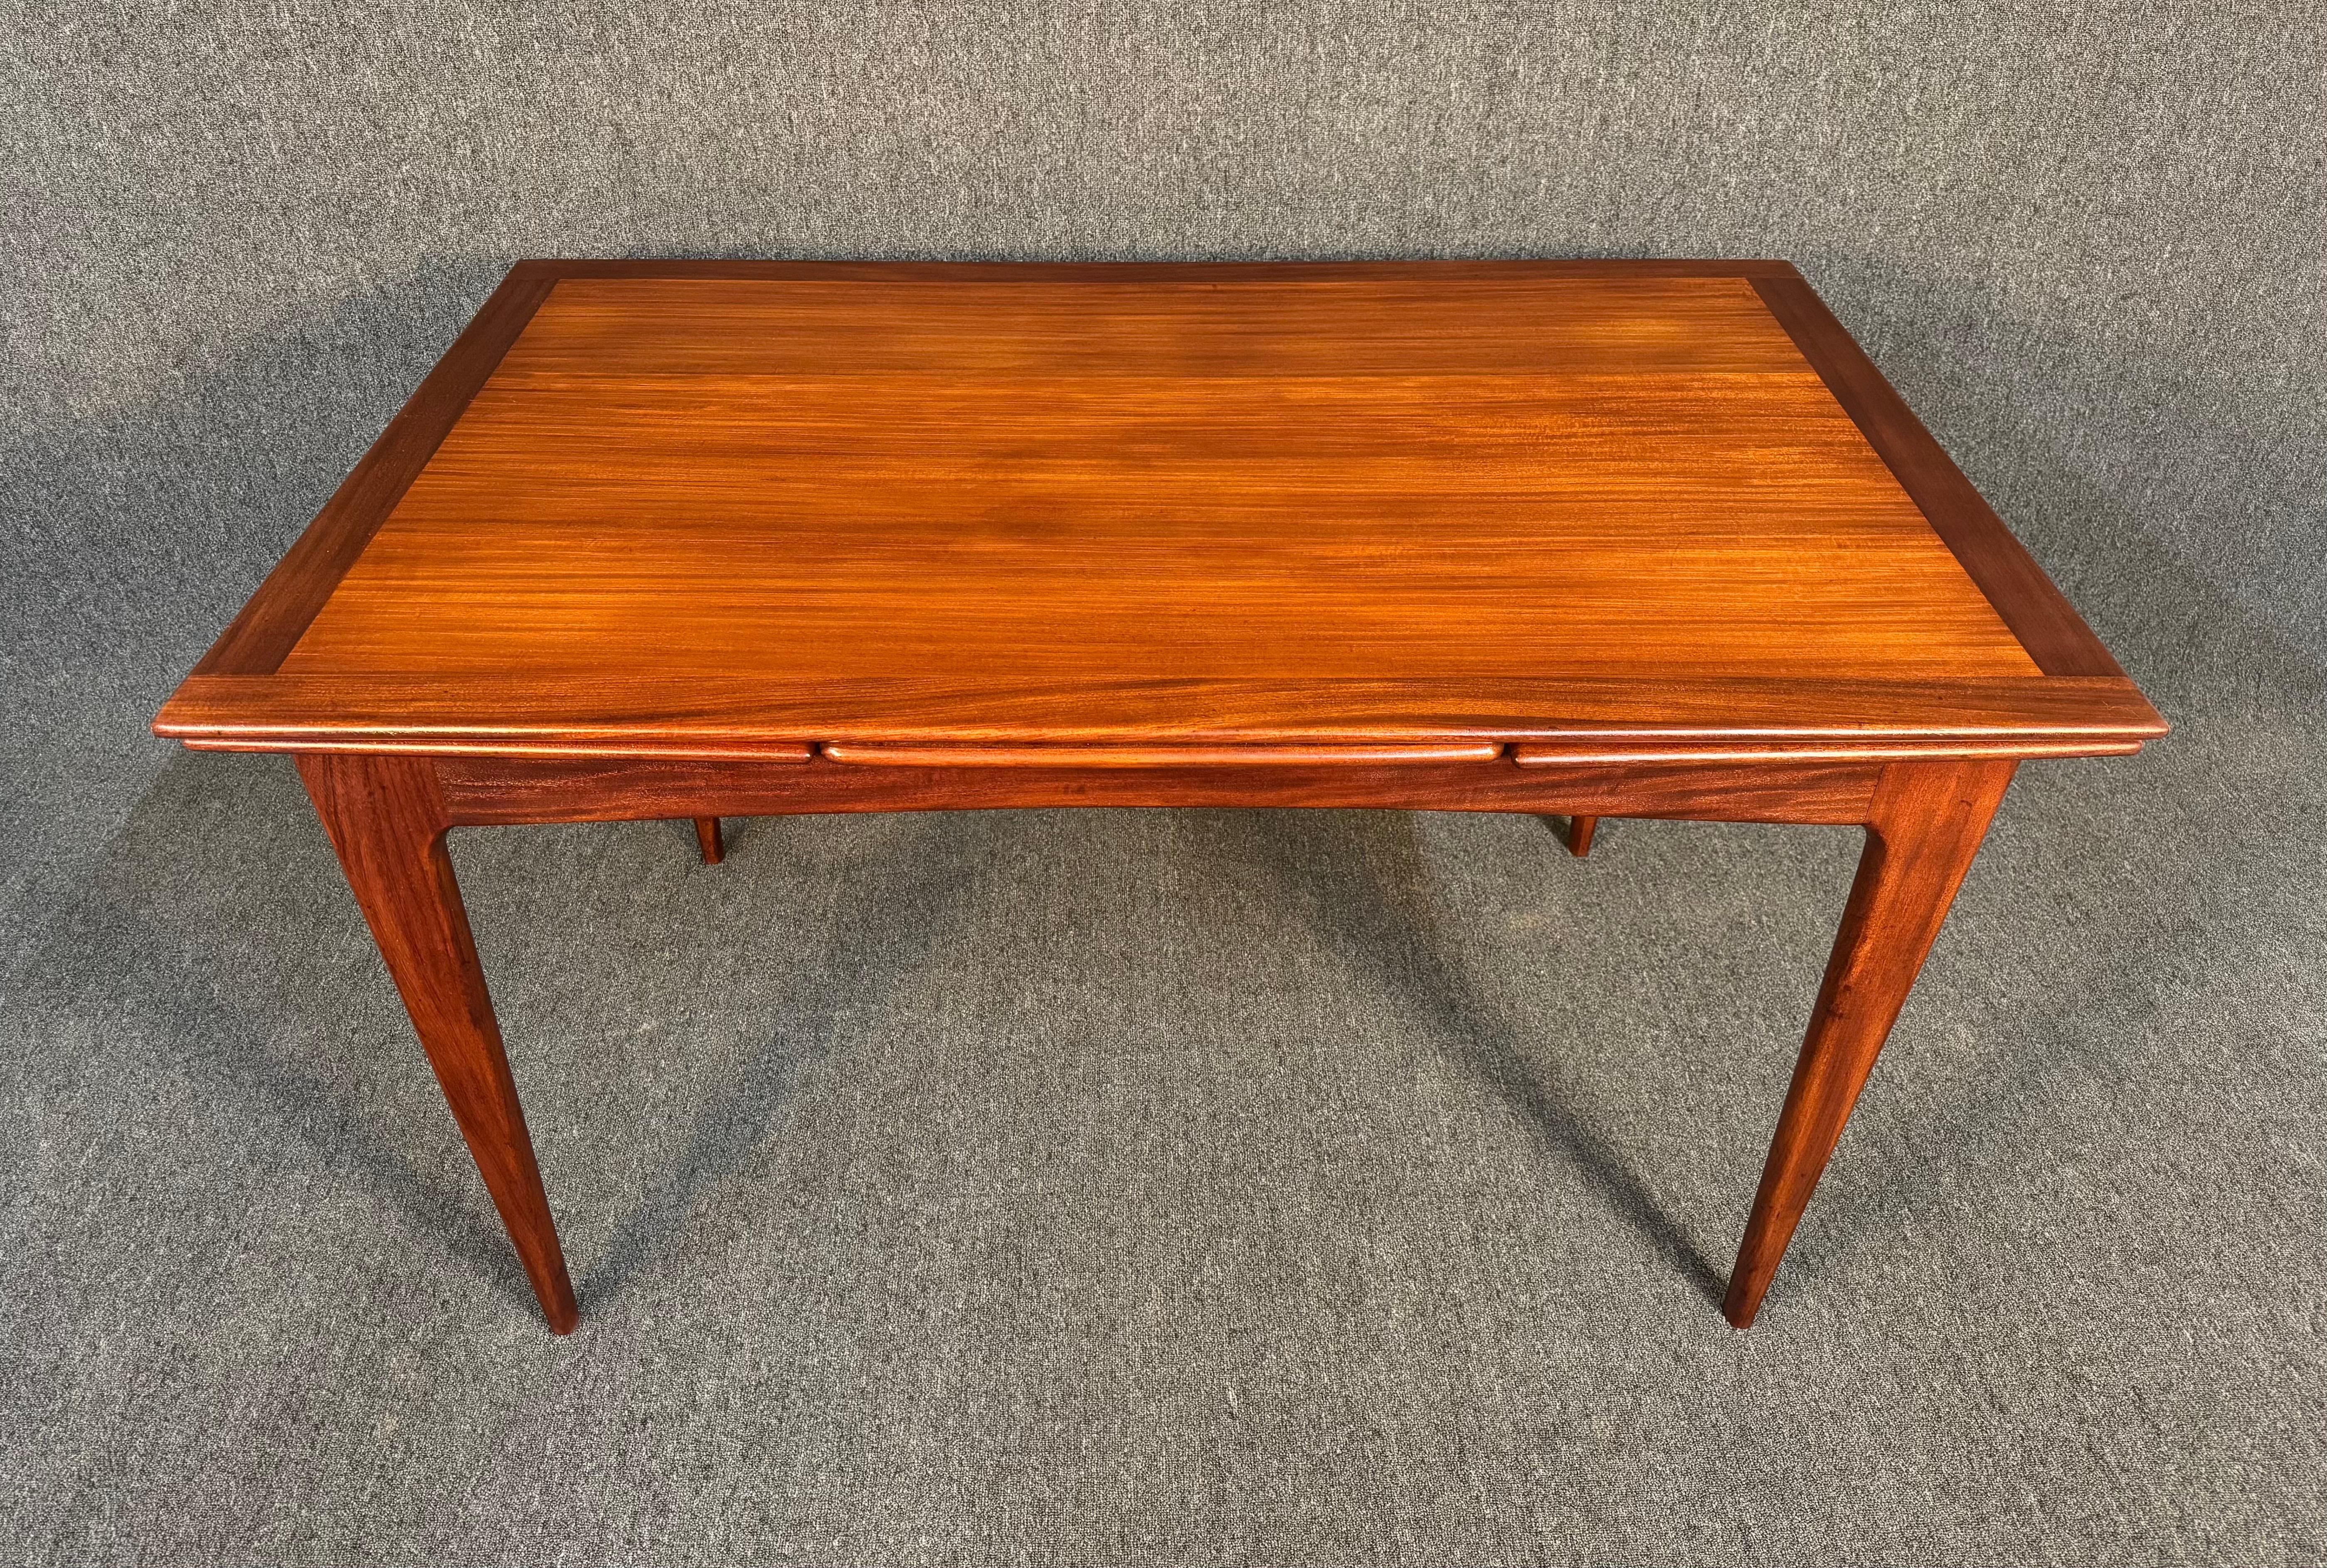 Vintage British Mid Century Modern Afromasia Teak Dining Table by A. Younger Ltd For Sale 5